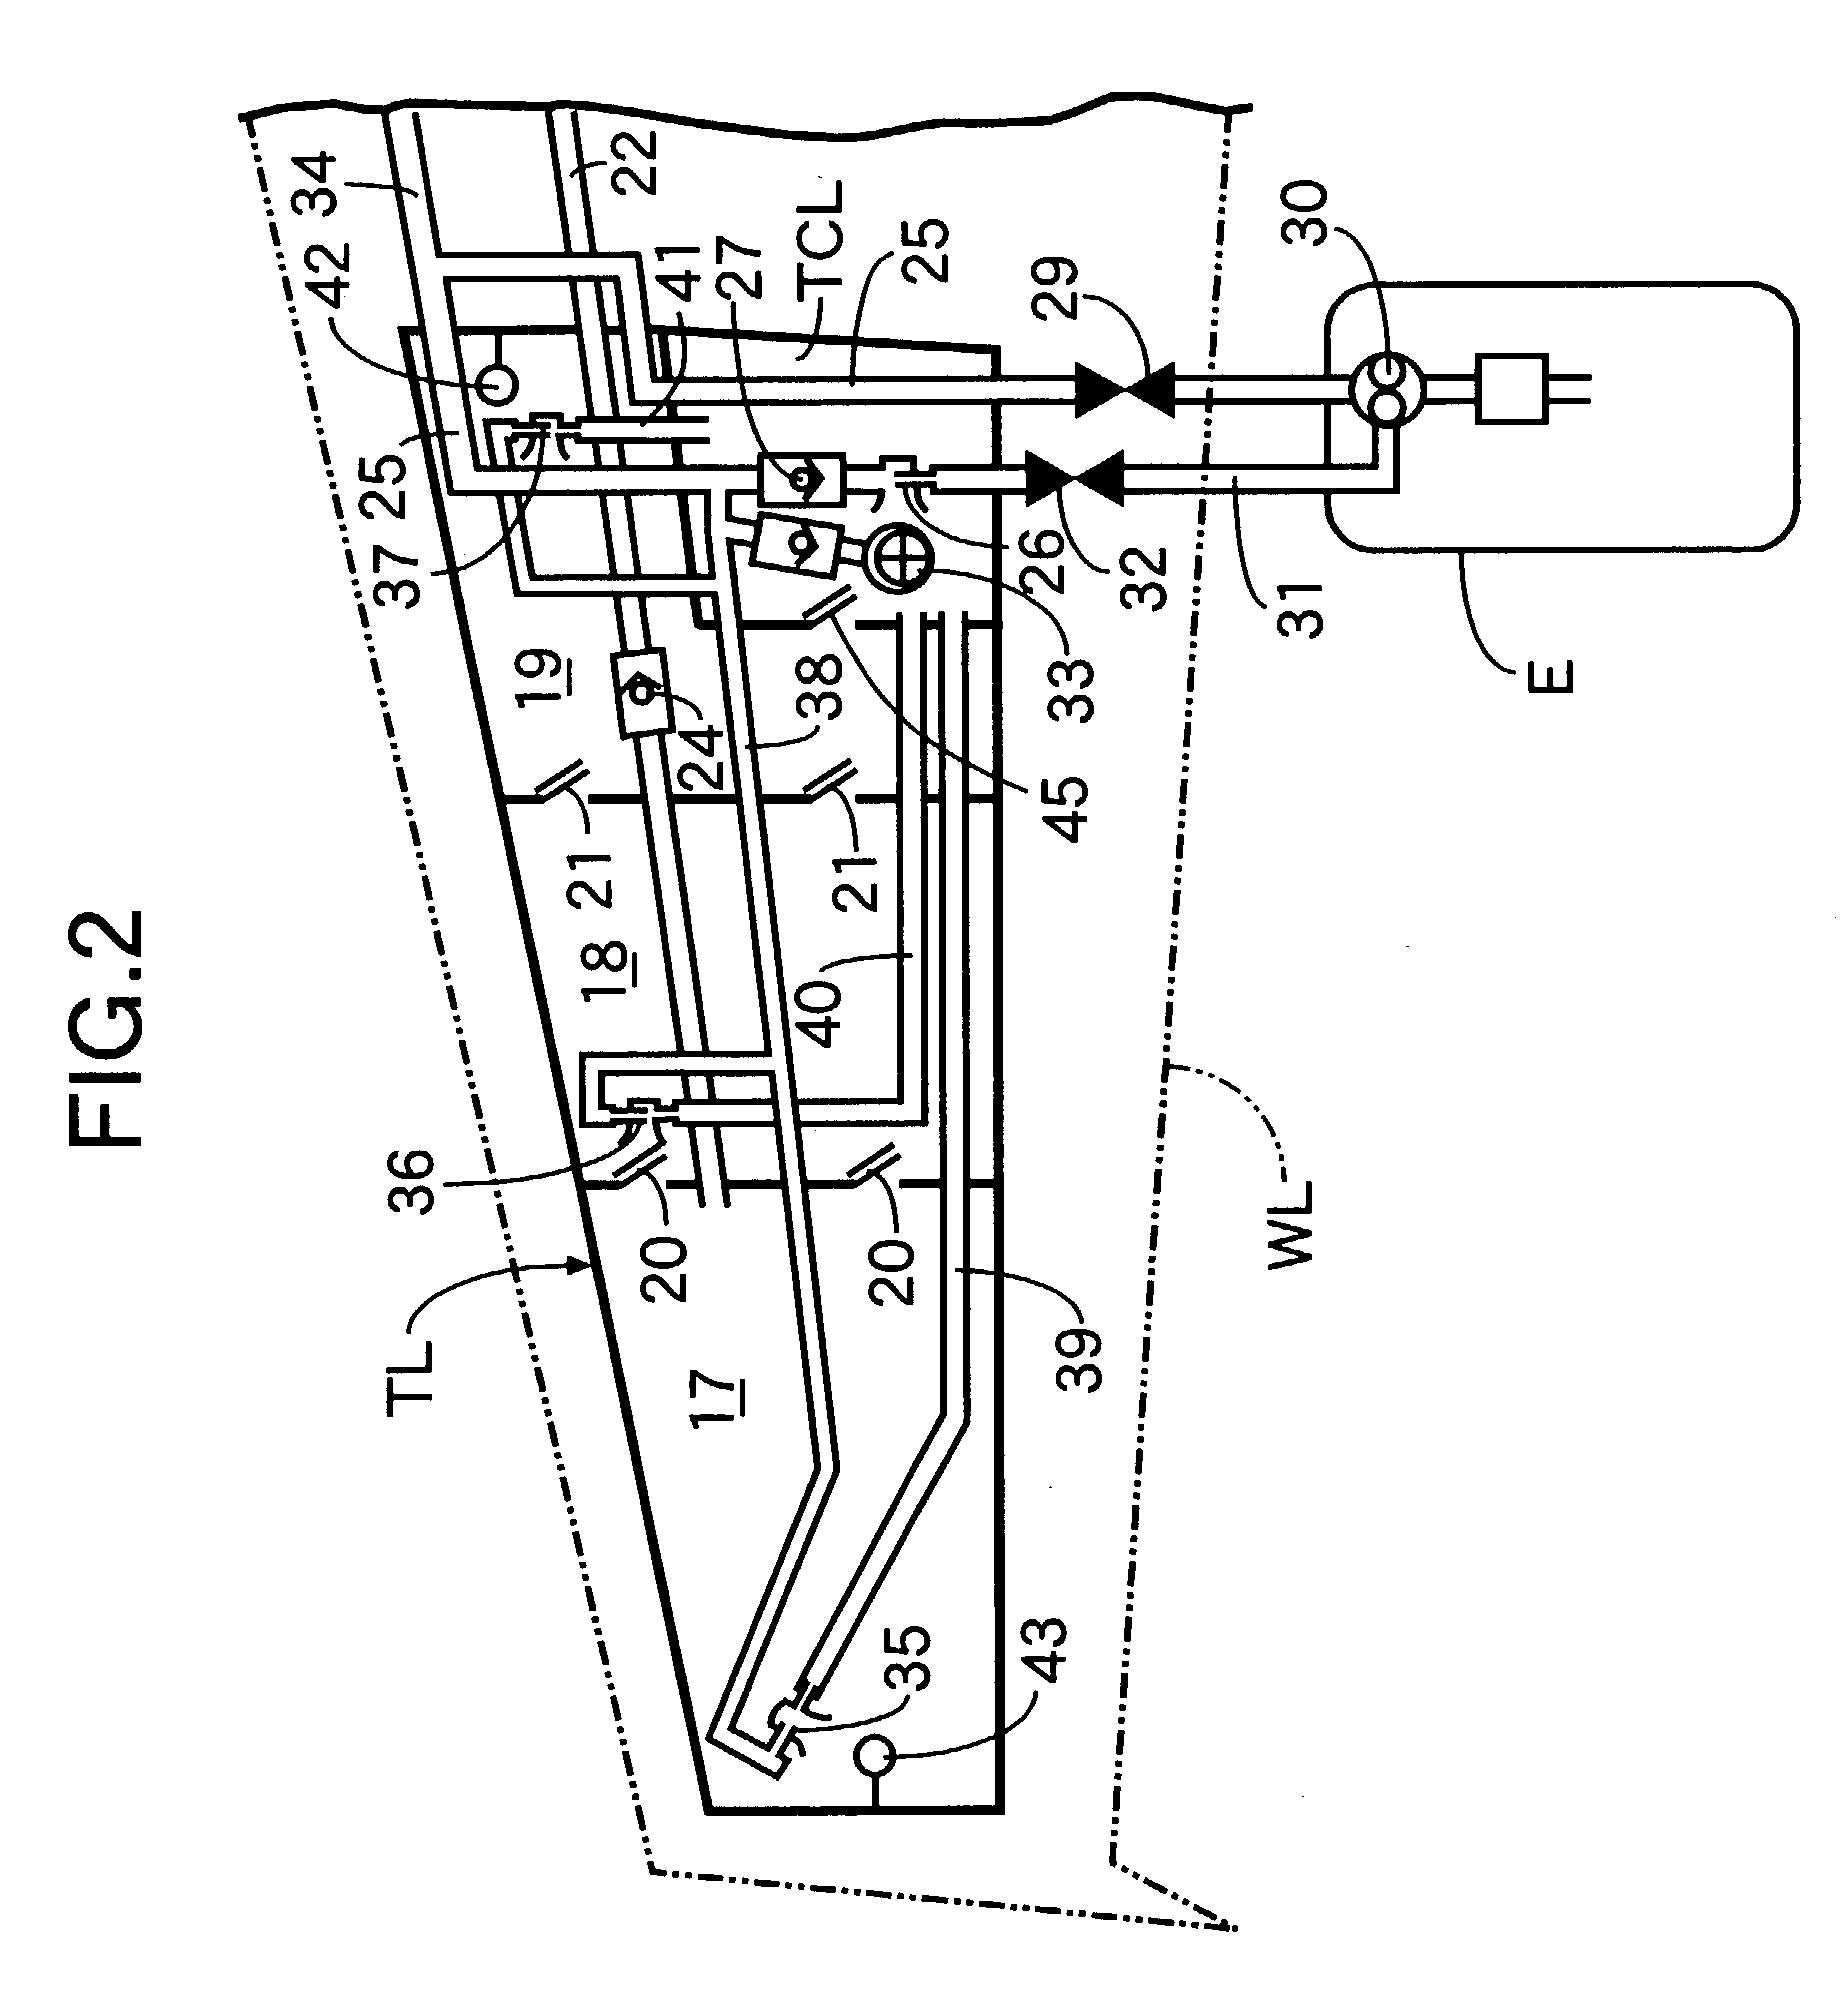 Airplane fuel supply system and airplane wing pipeline assembly method